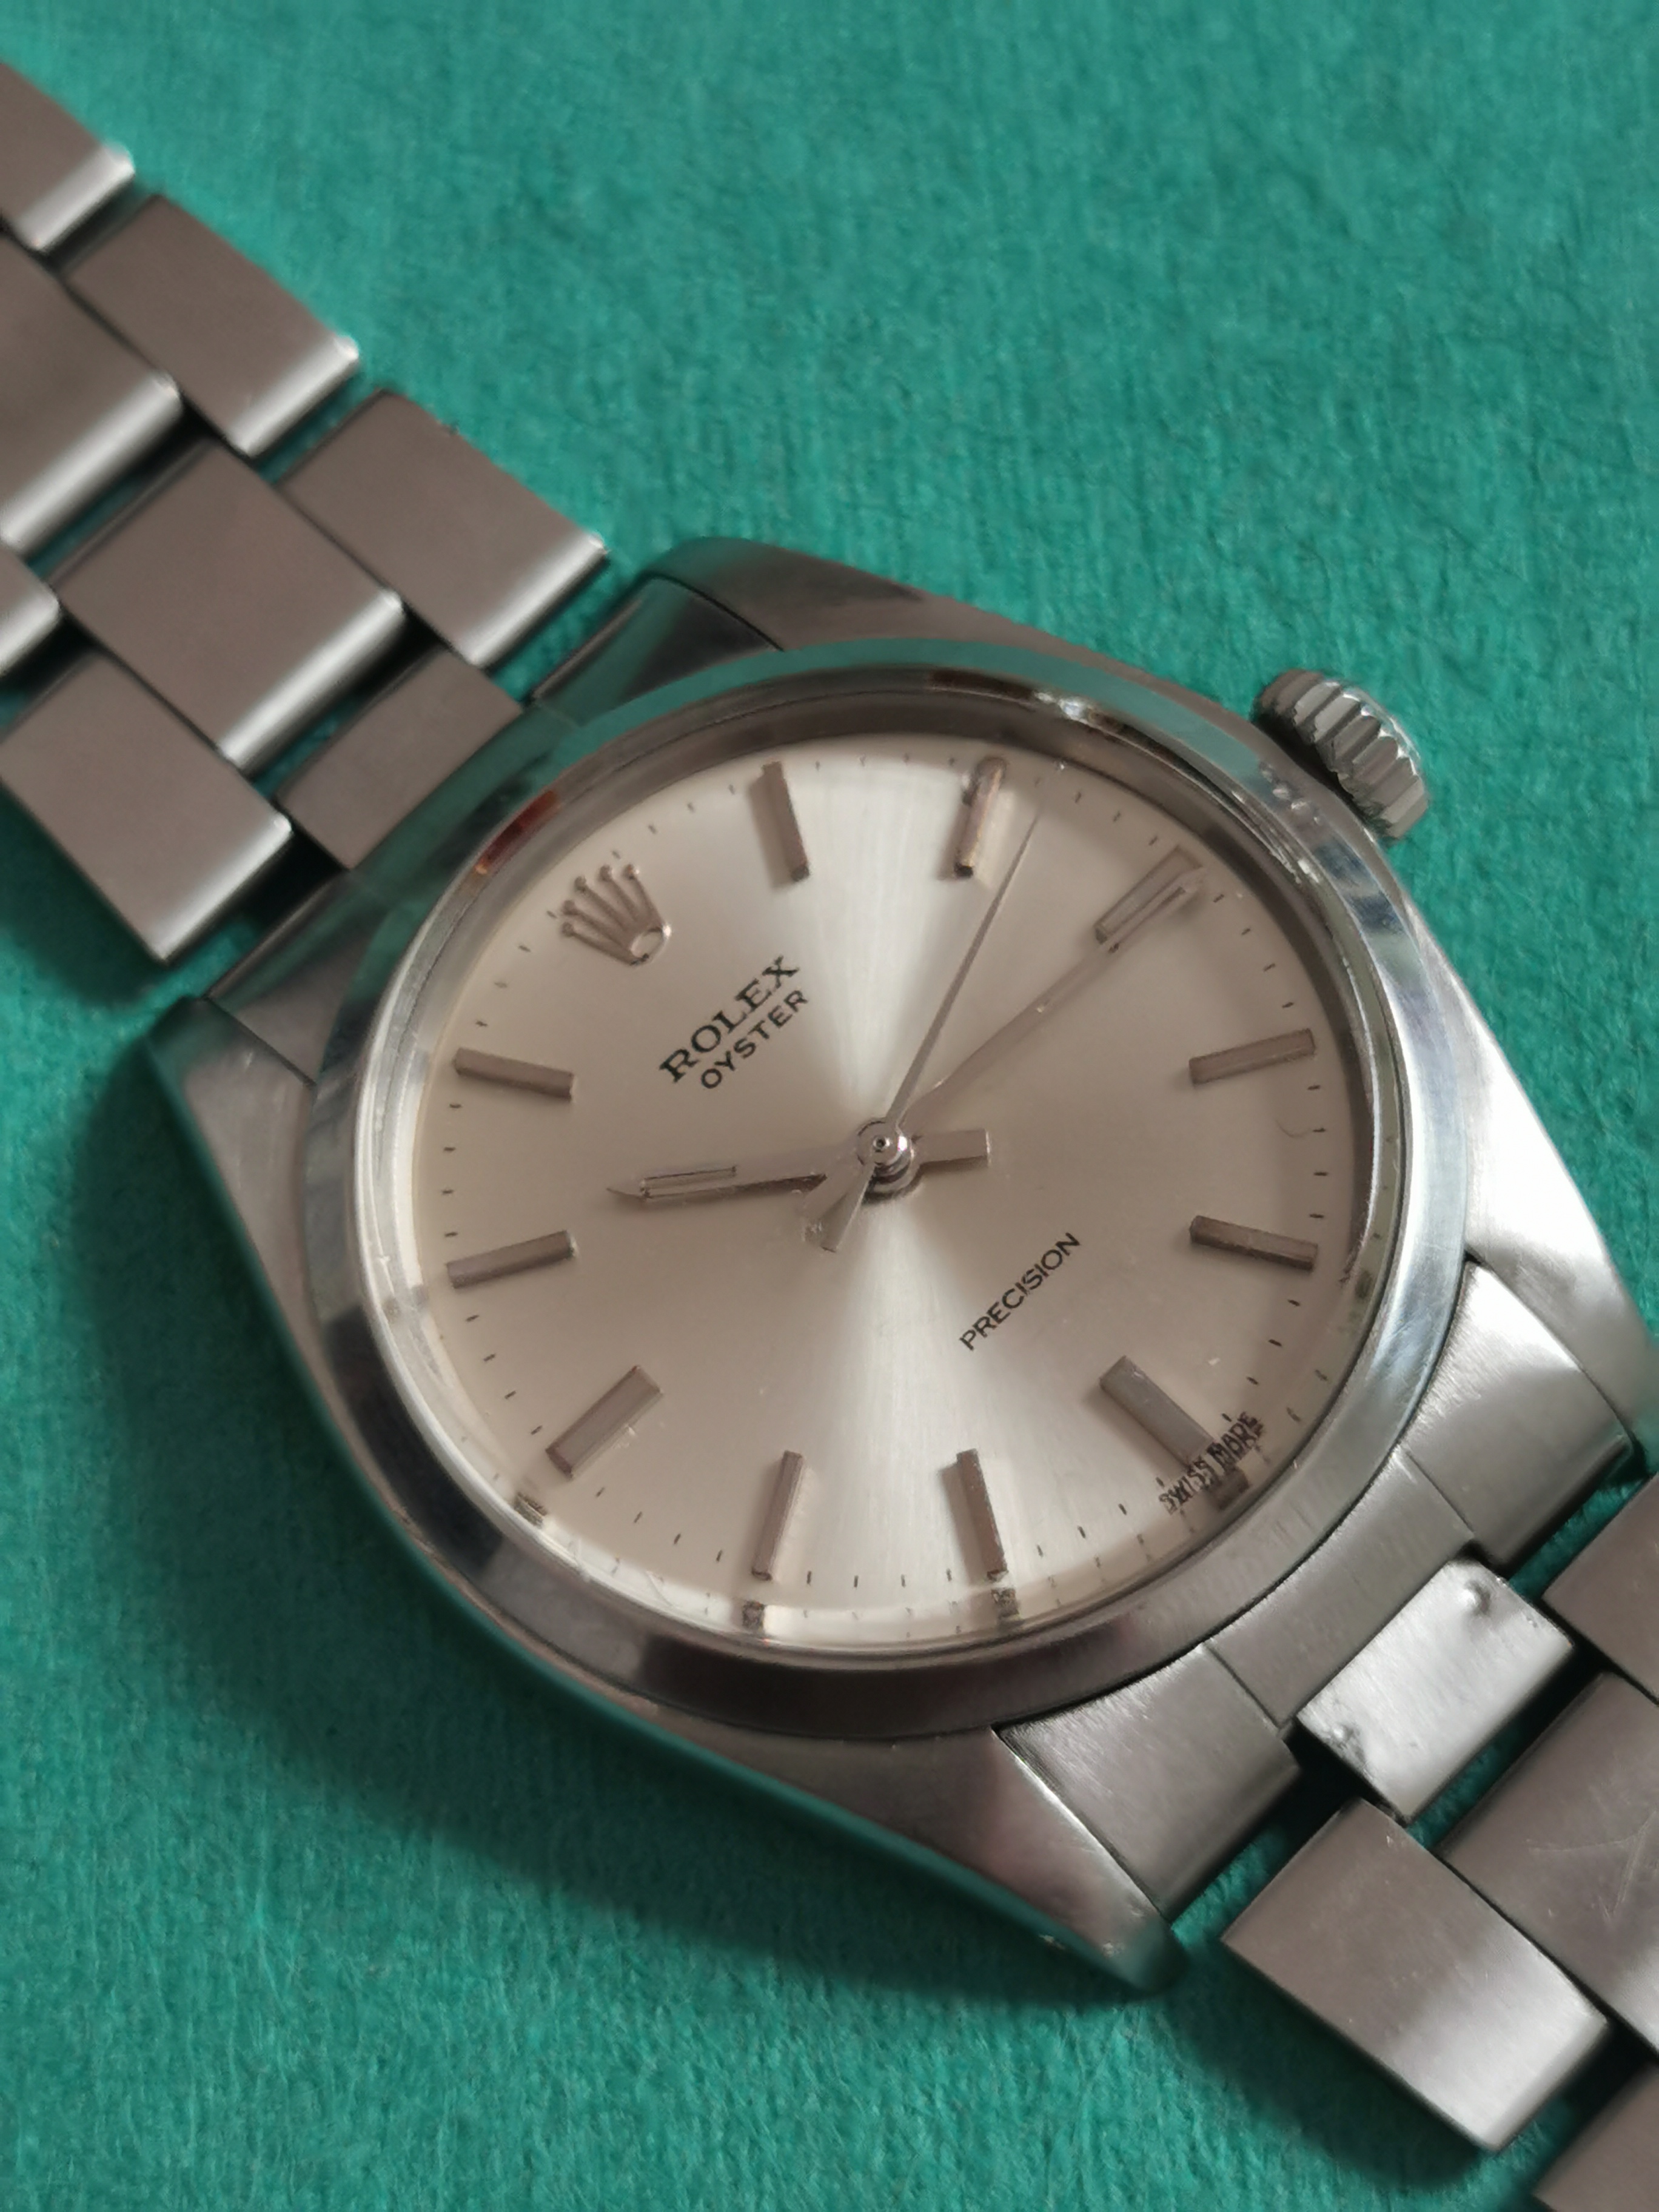 Rolex Oyster Precision Oyster Precision Reference 6426 — Wind Vintage 1225 caliber - Oyster bracelet - 1973 | San Giorgio a Cremano